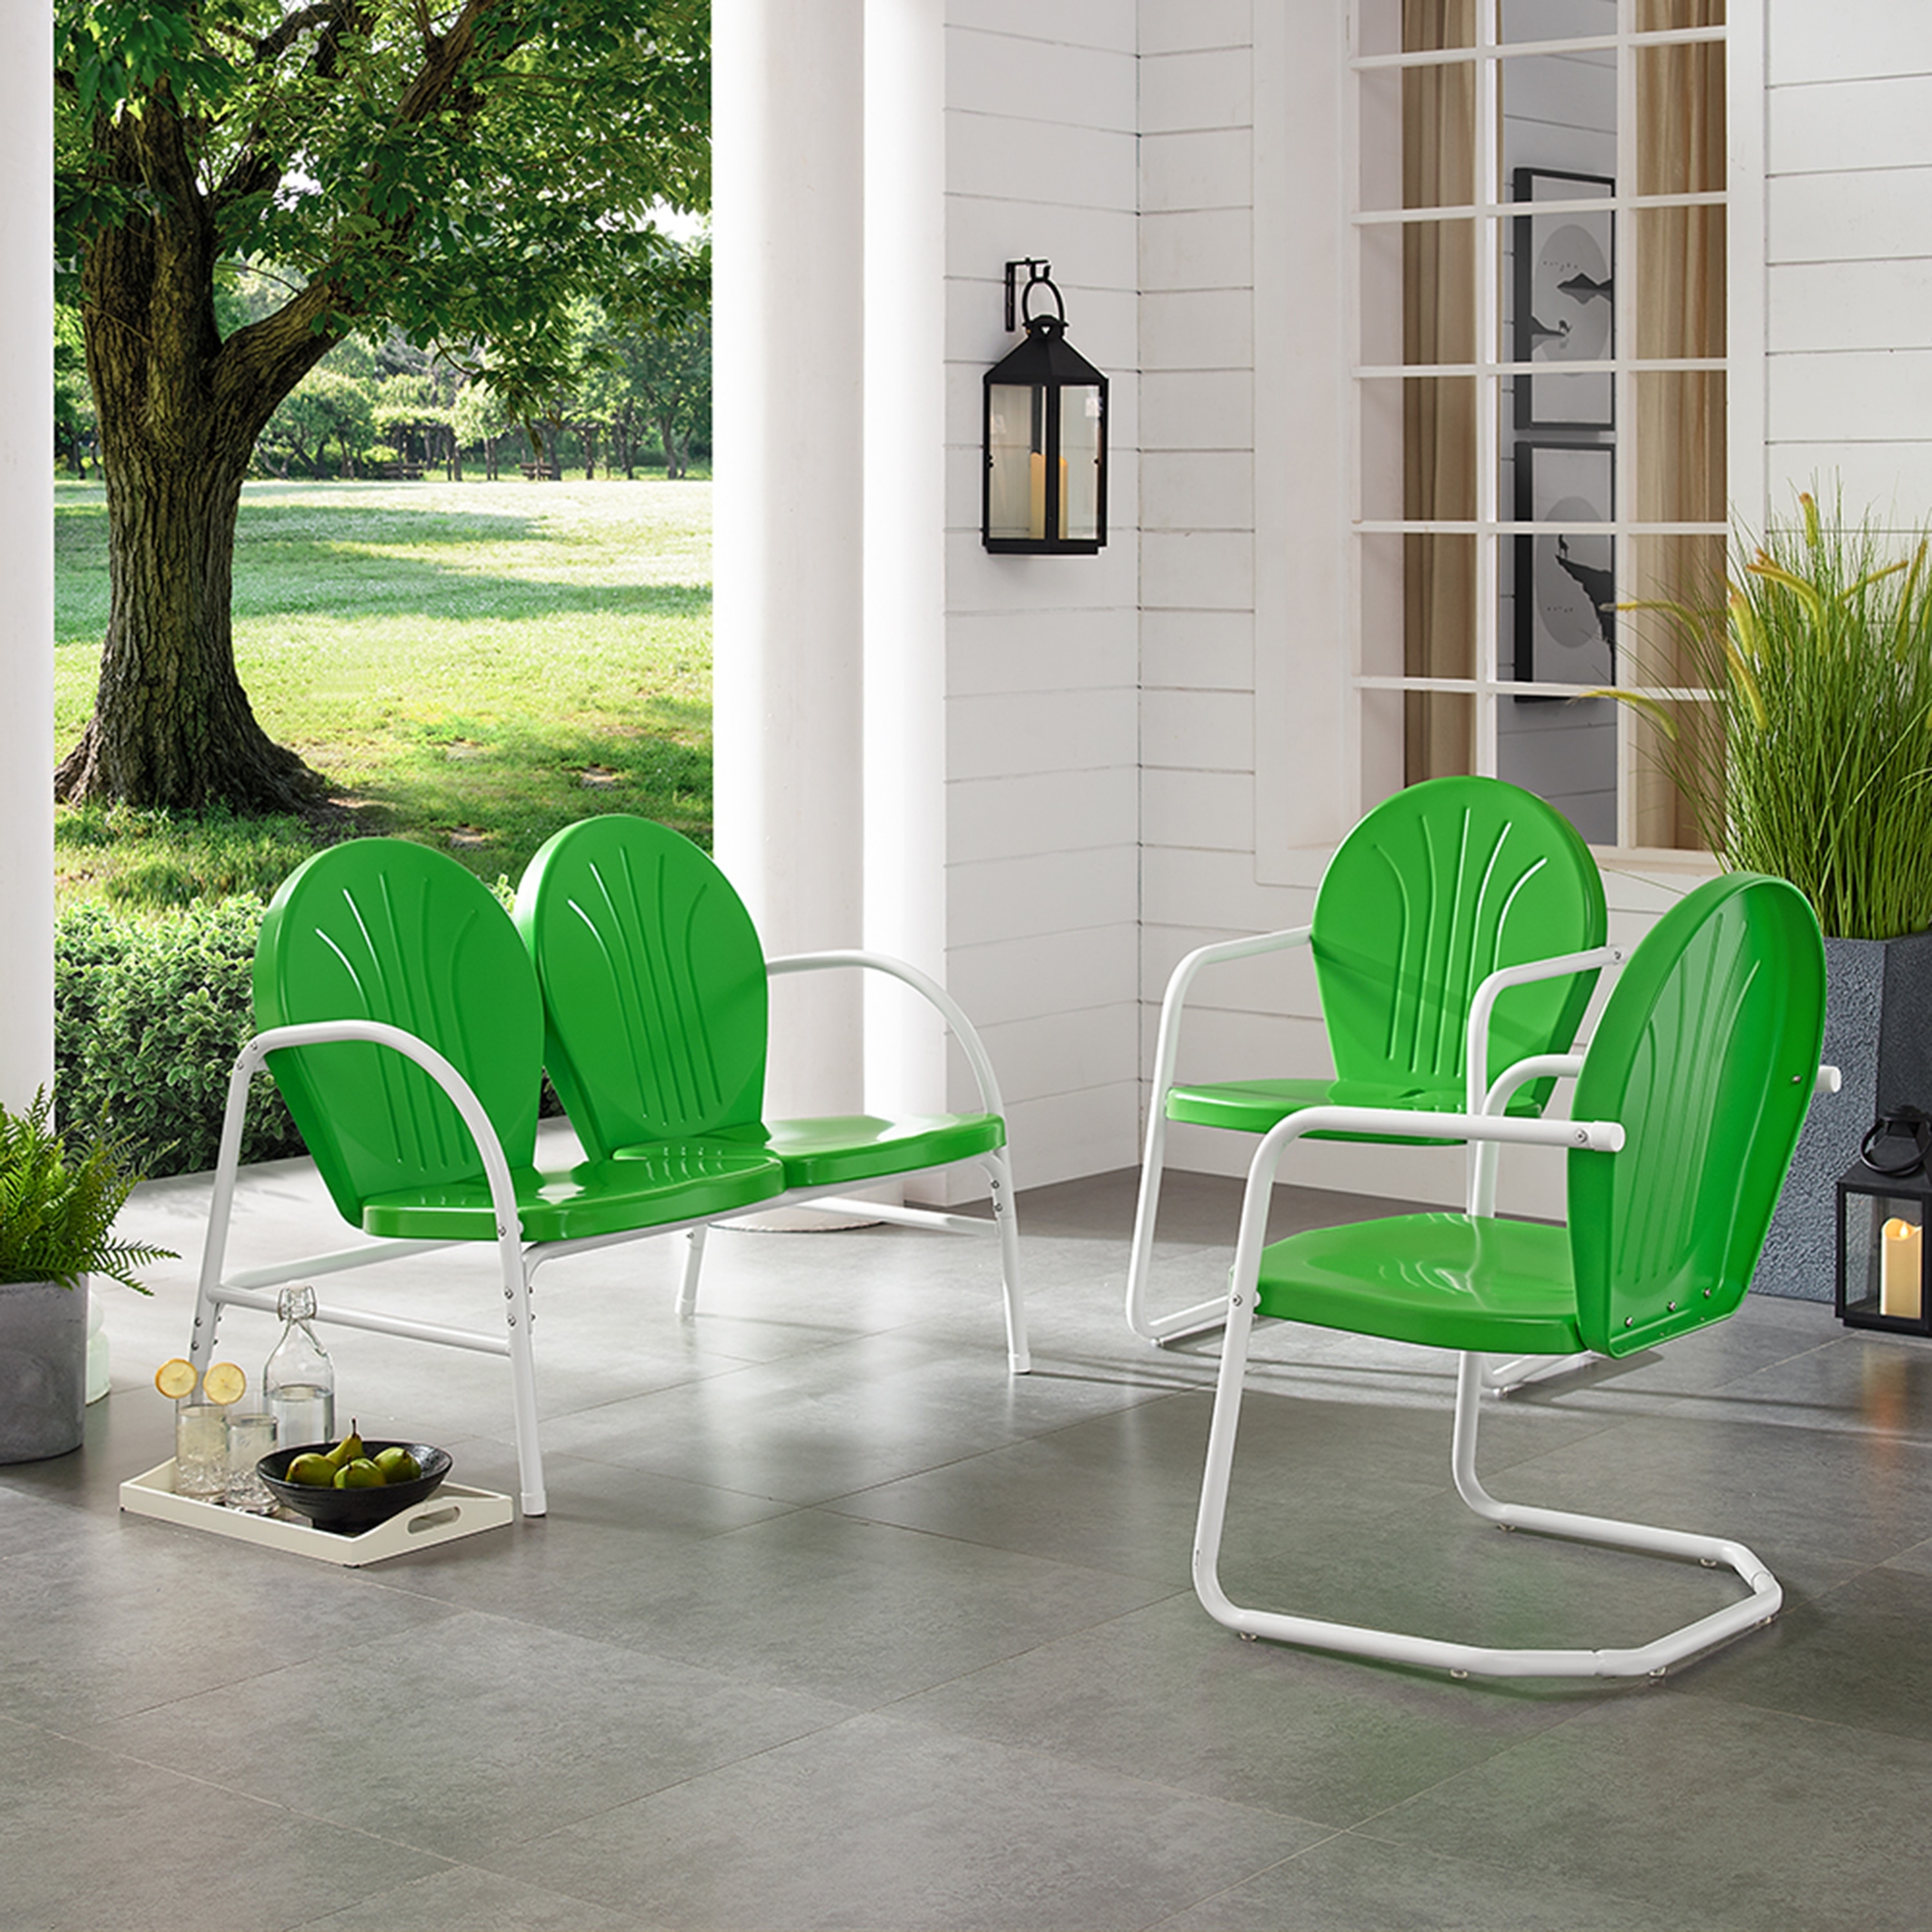 Griffith 3 Piece Metal Outdoor Conversation Seating Set Loveseat & 2 Chairs In Grasshopper Green Finish